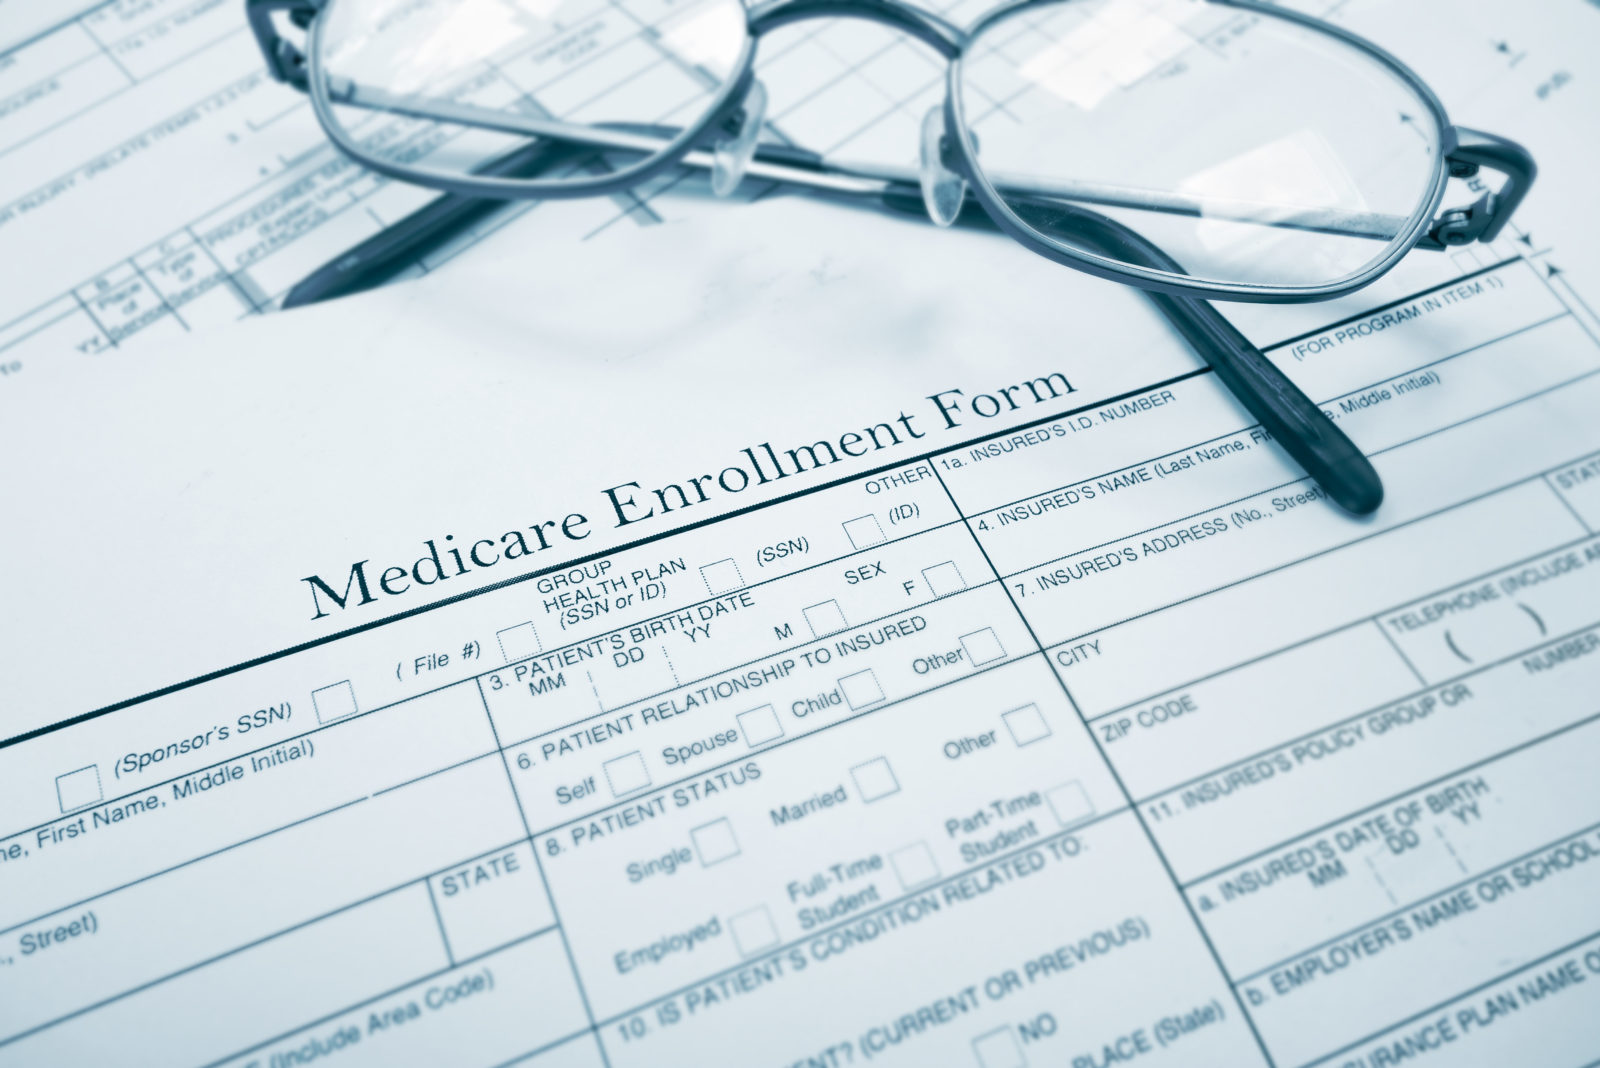 Picture of a Medicare enrollment form with eye glasses resting on top of the form.